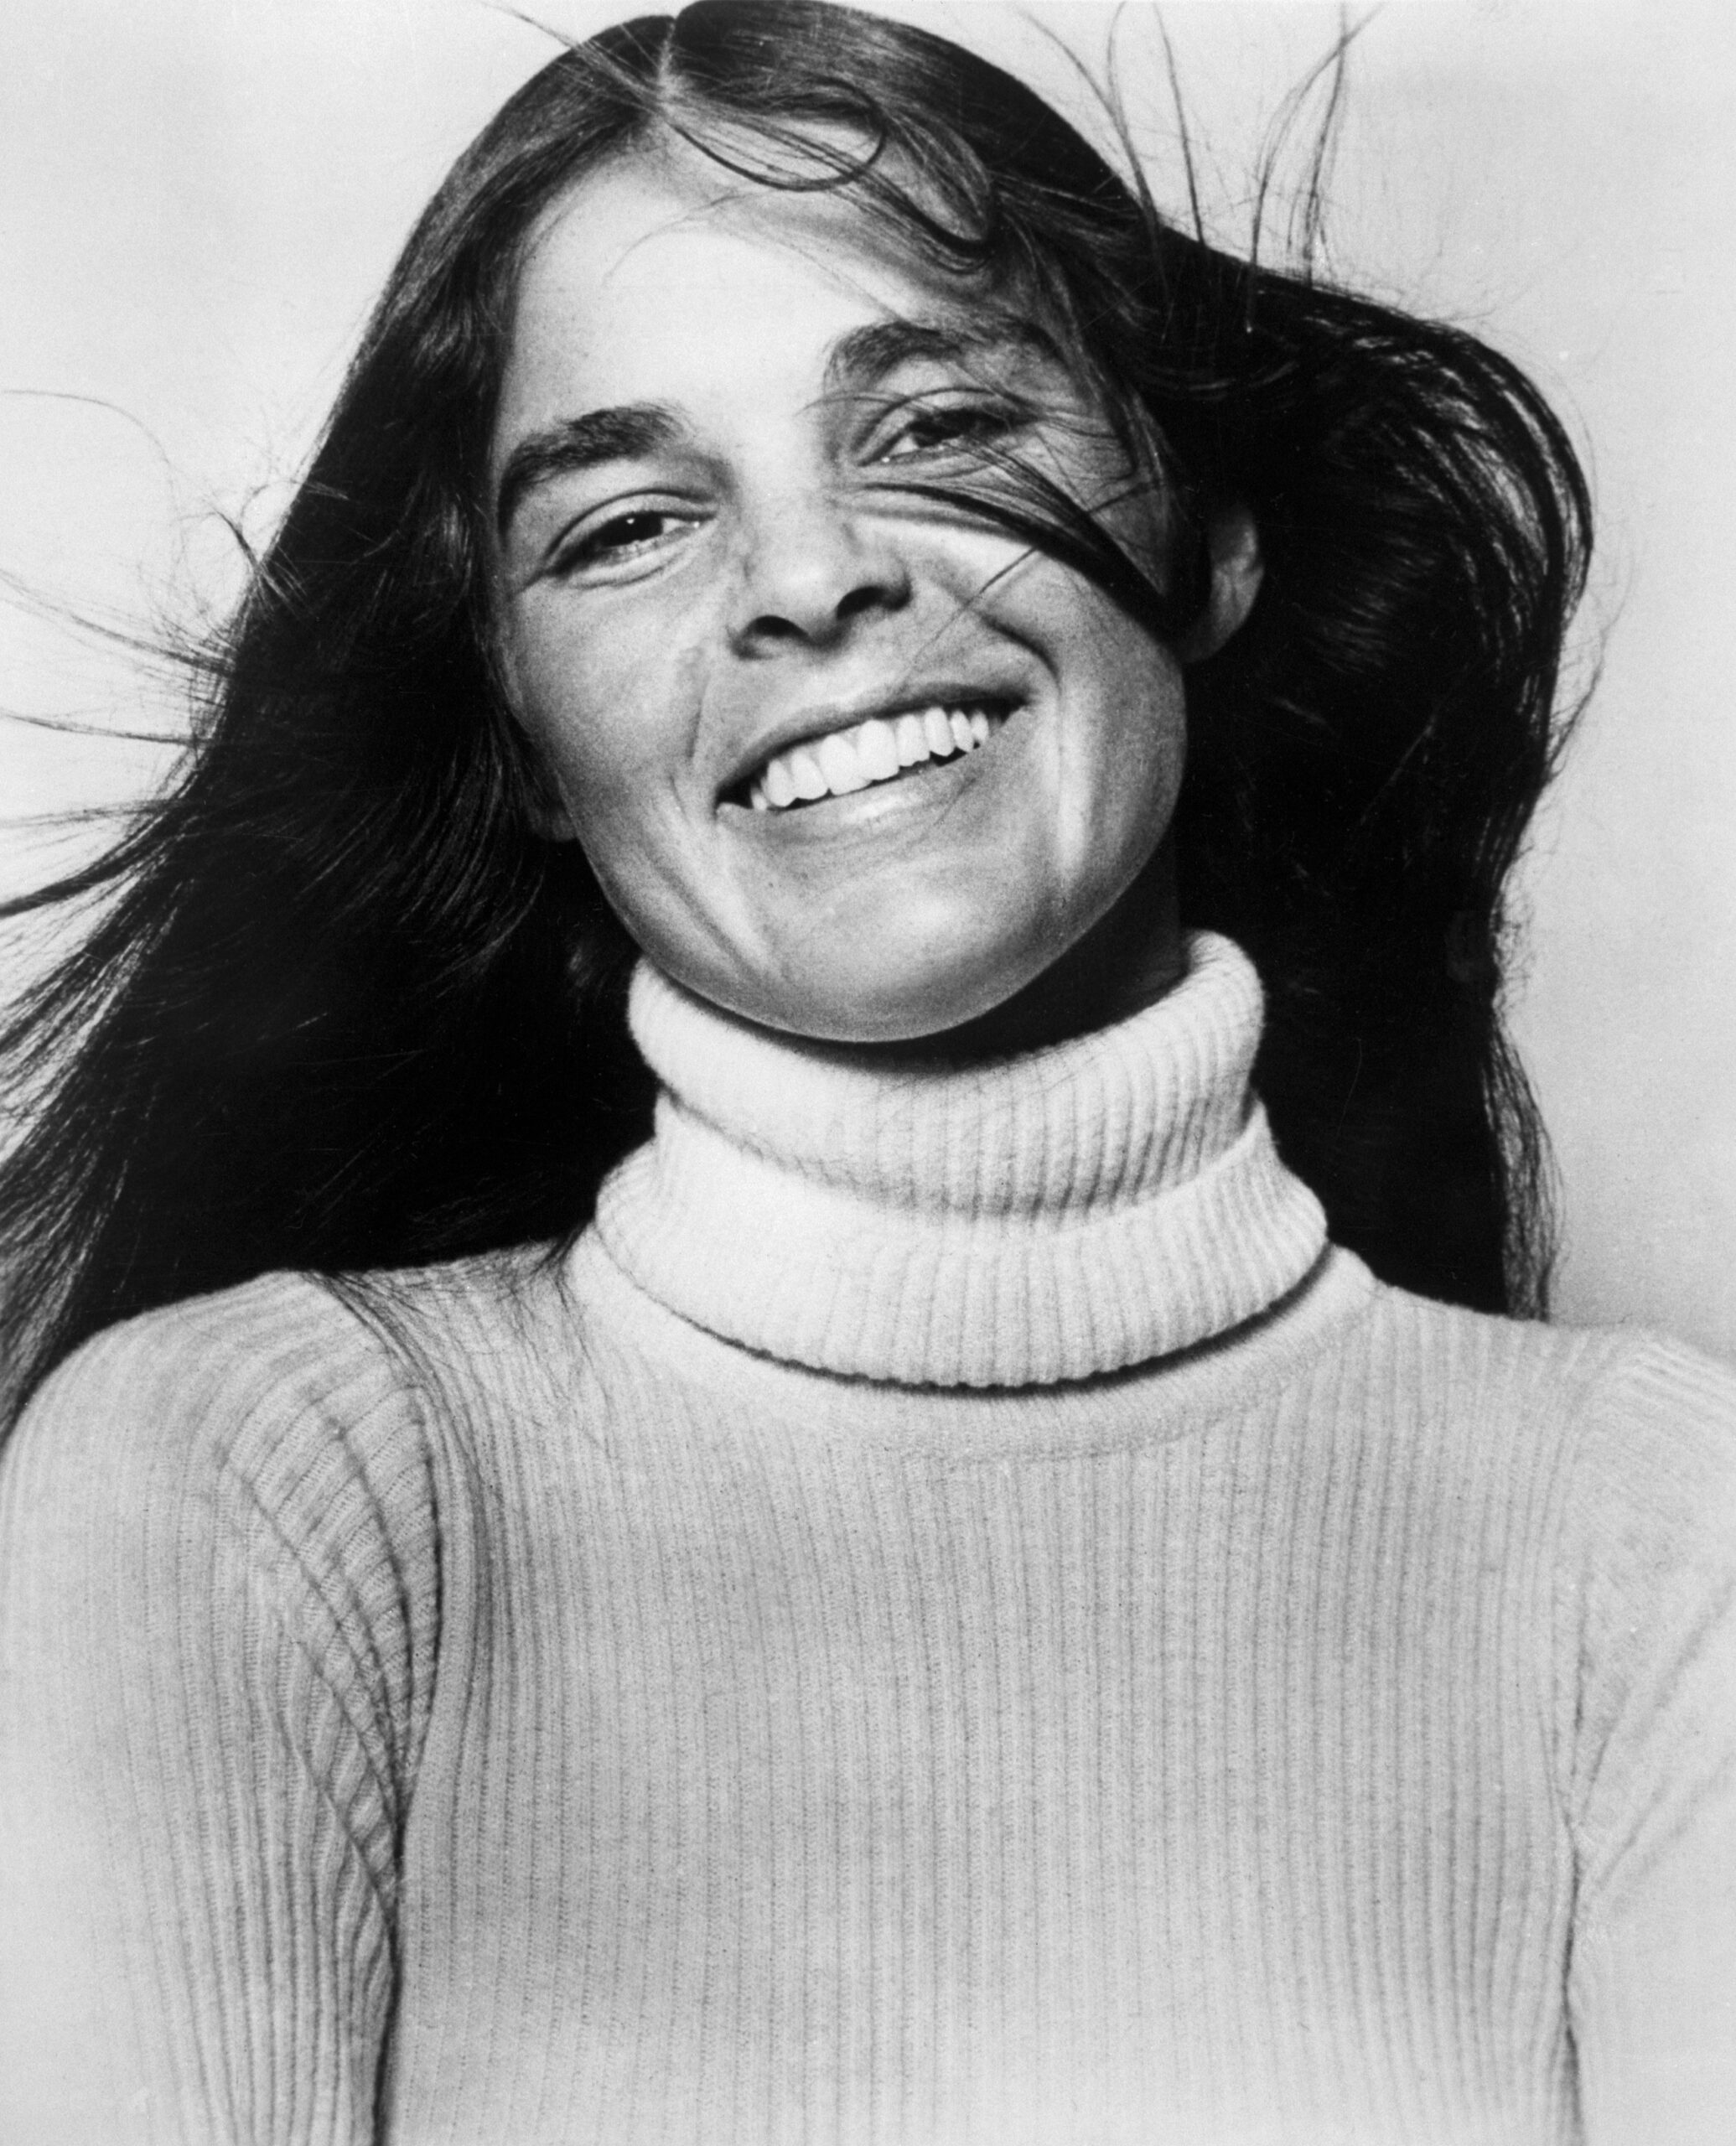 Ali MacGraw in a close-up picture for "Love Story" in 1971 | Source: Getty Images